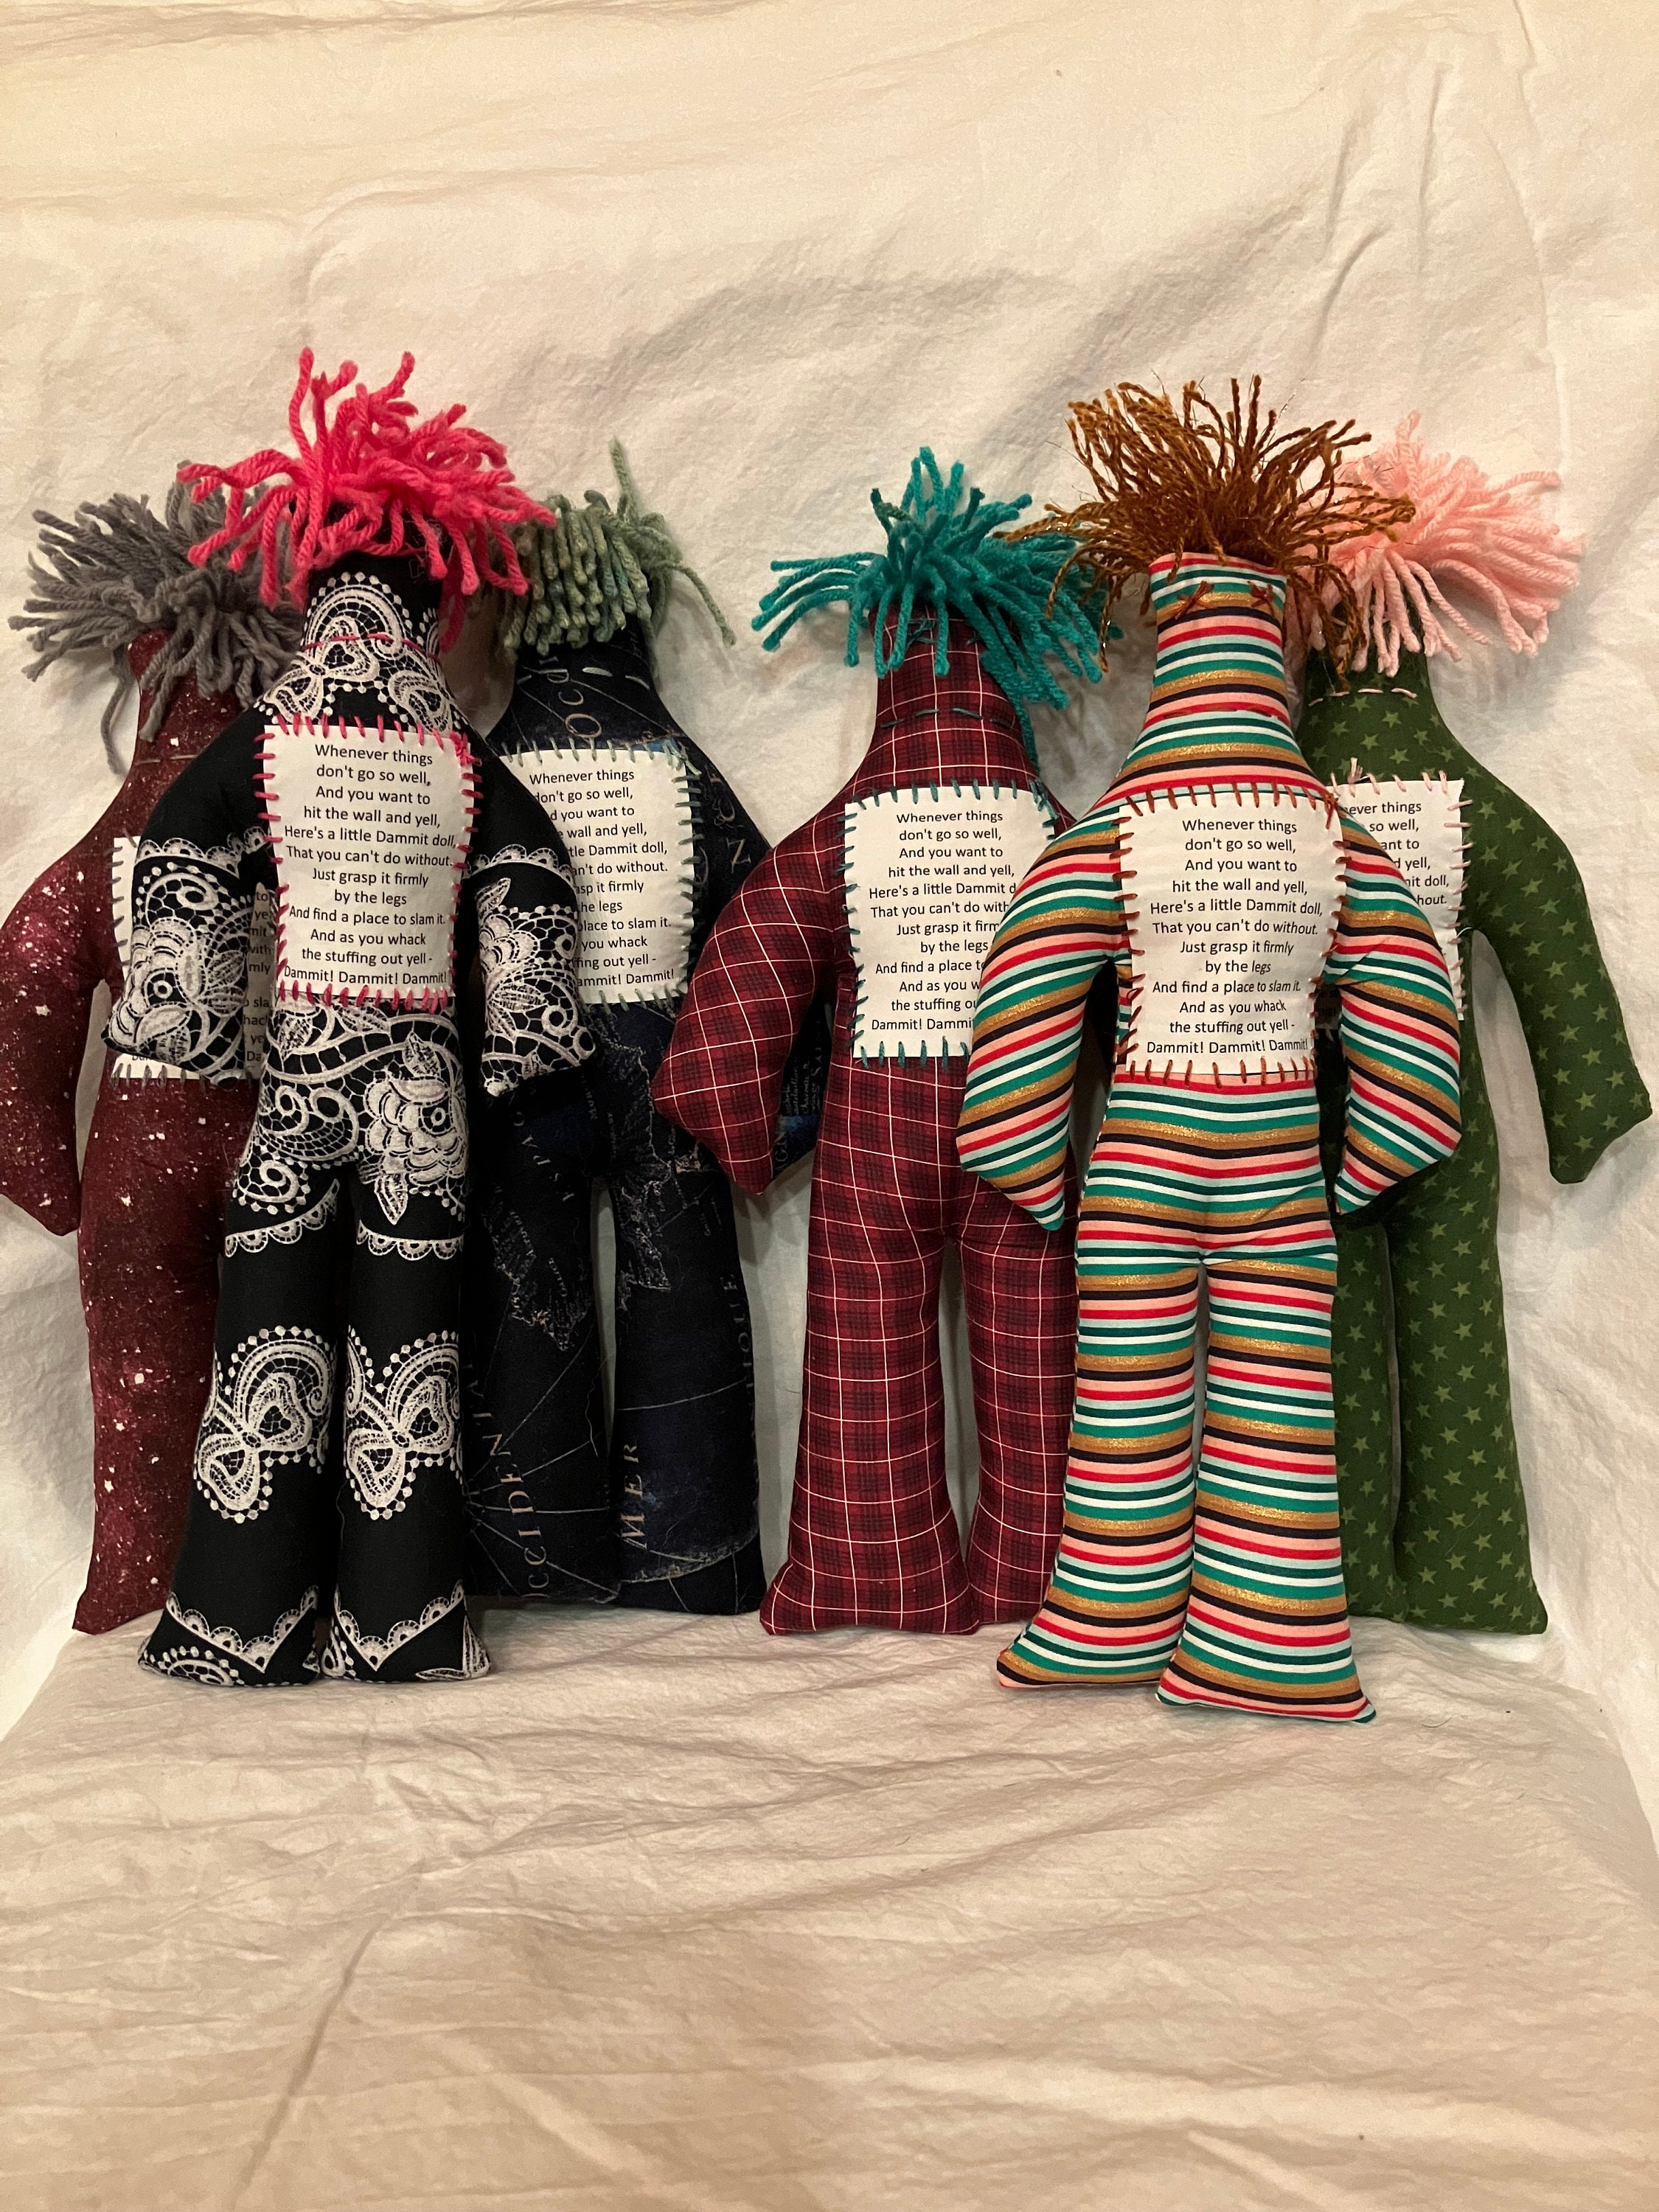  Dammit Doll - Classic Random Color, Stress Relief - Gag Gift -  2 Dolls : Toys & Games